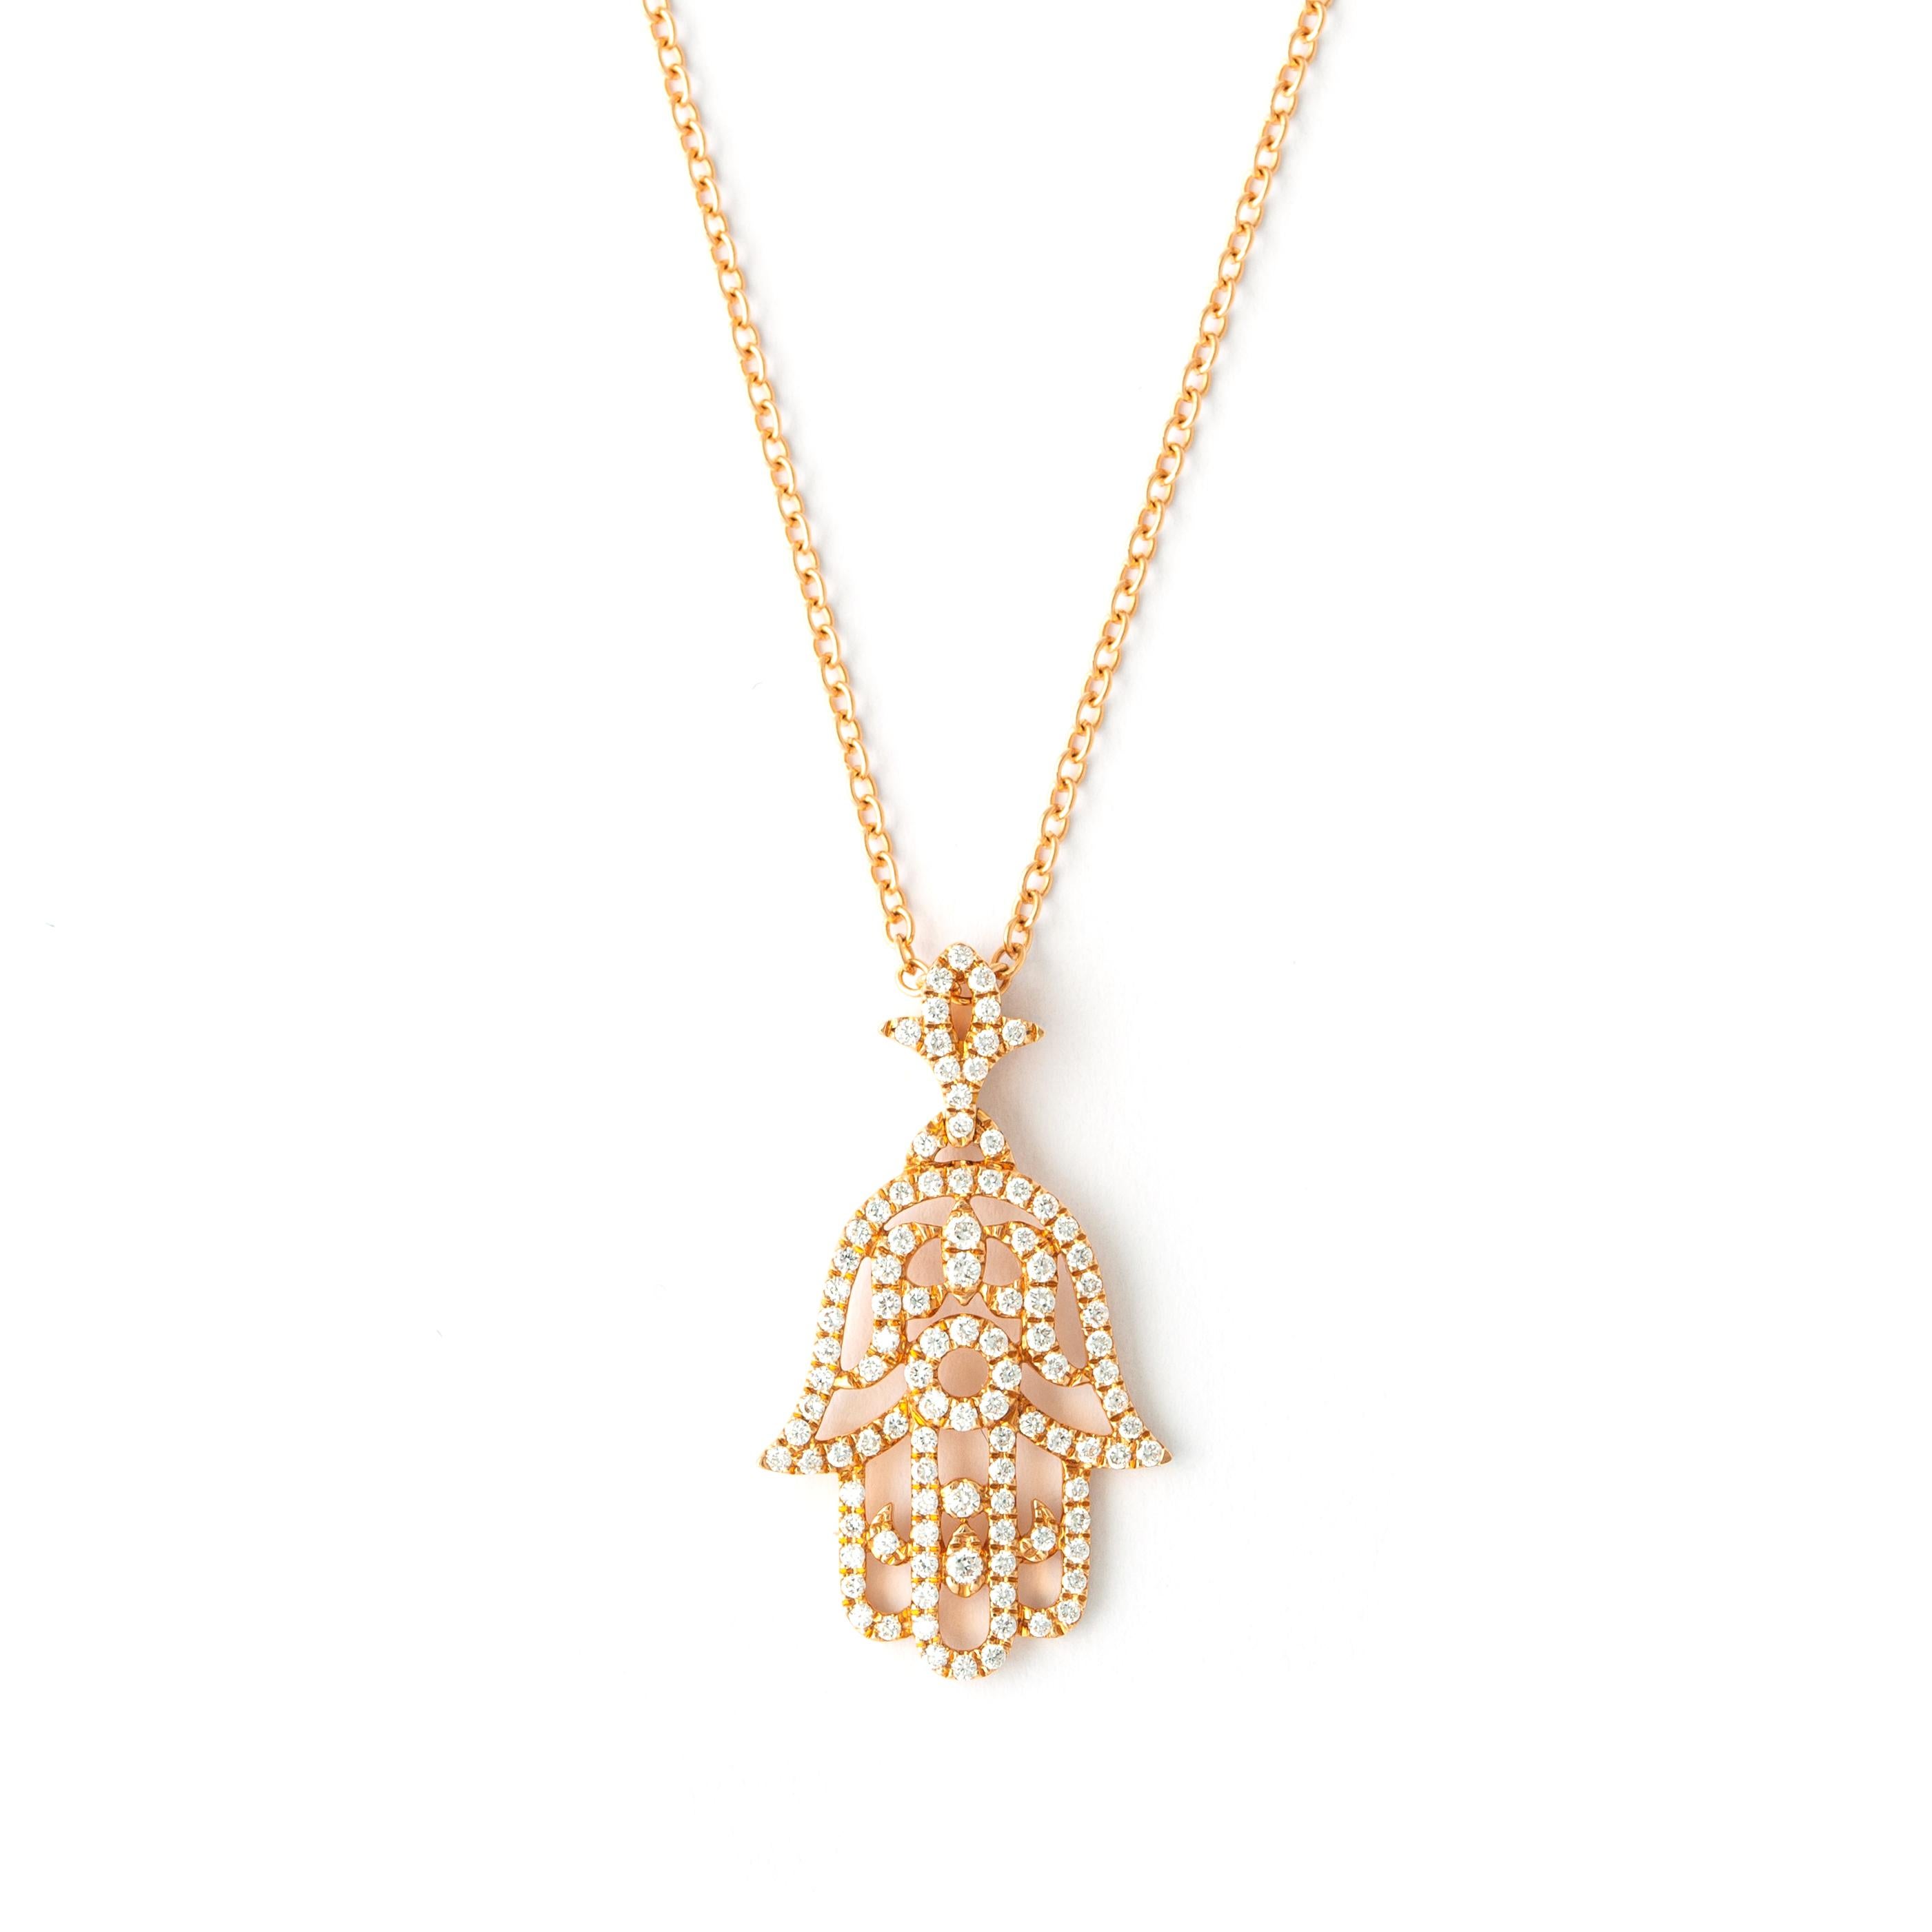 Fatma Hand pendant in 18kt pink gold set with 103 diamonds 0.33 cts small model.

Length: 45.00 centimeters (17.72 inches) up to 50.00 centimeters (19.69 inches).

Pendant length :2.50 centimeters ( 0.98 inches) 

Total weight: 3.76 grams. 